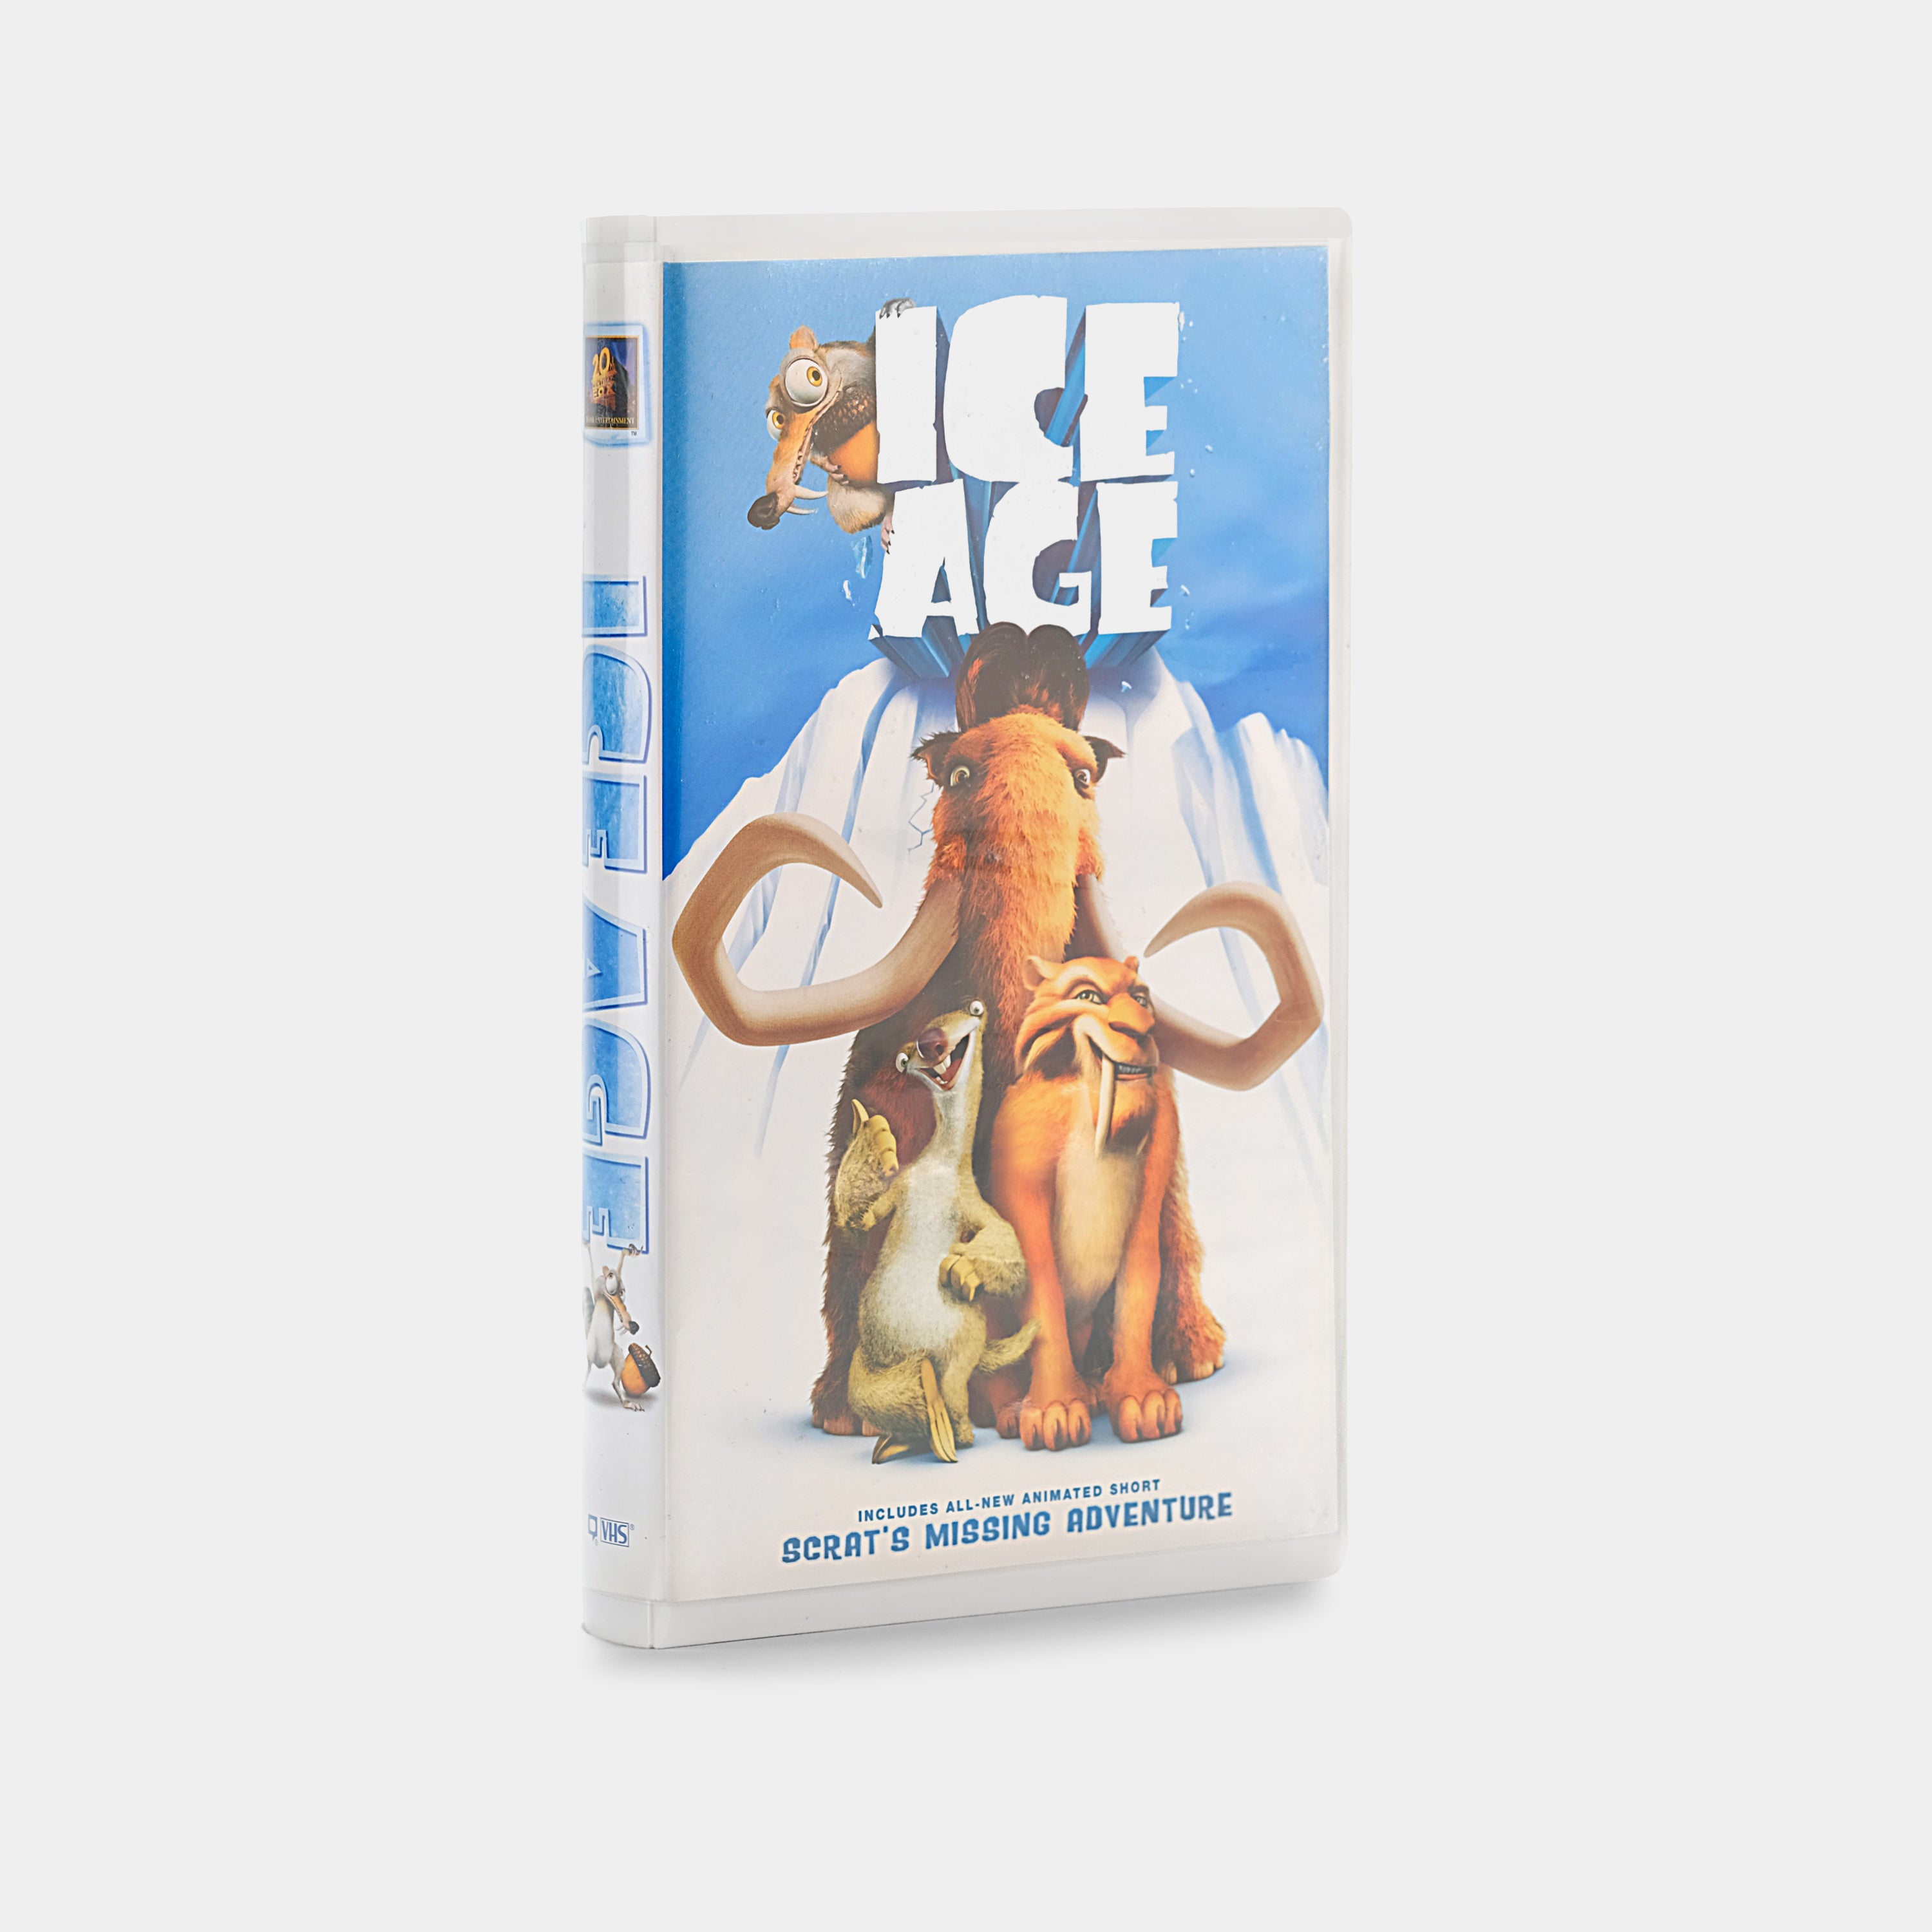 Ice Age VHS Tape